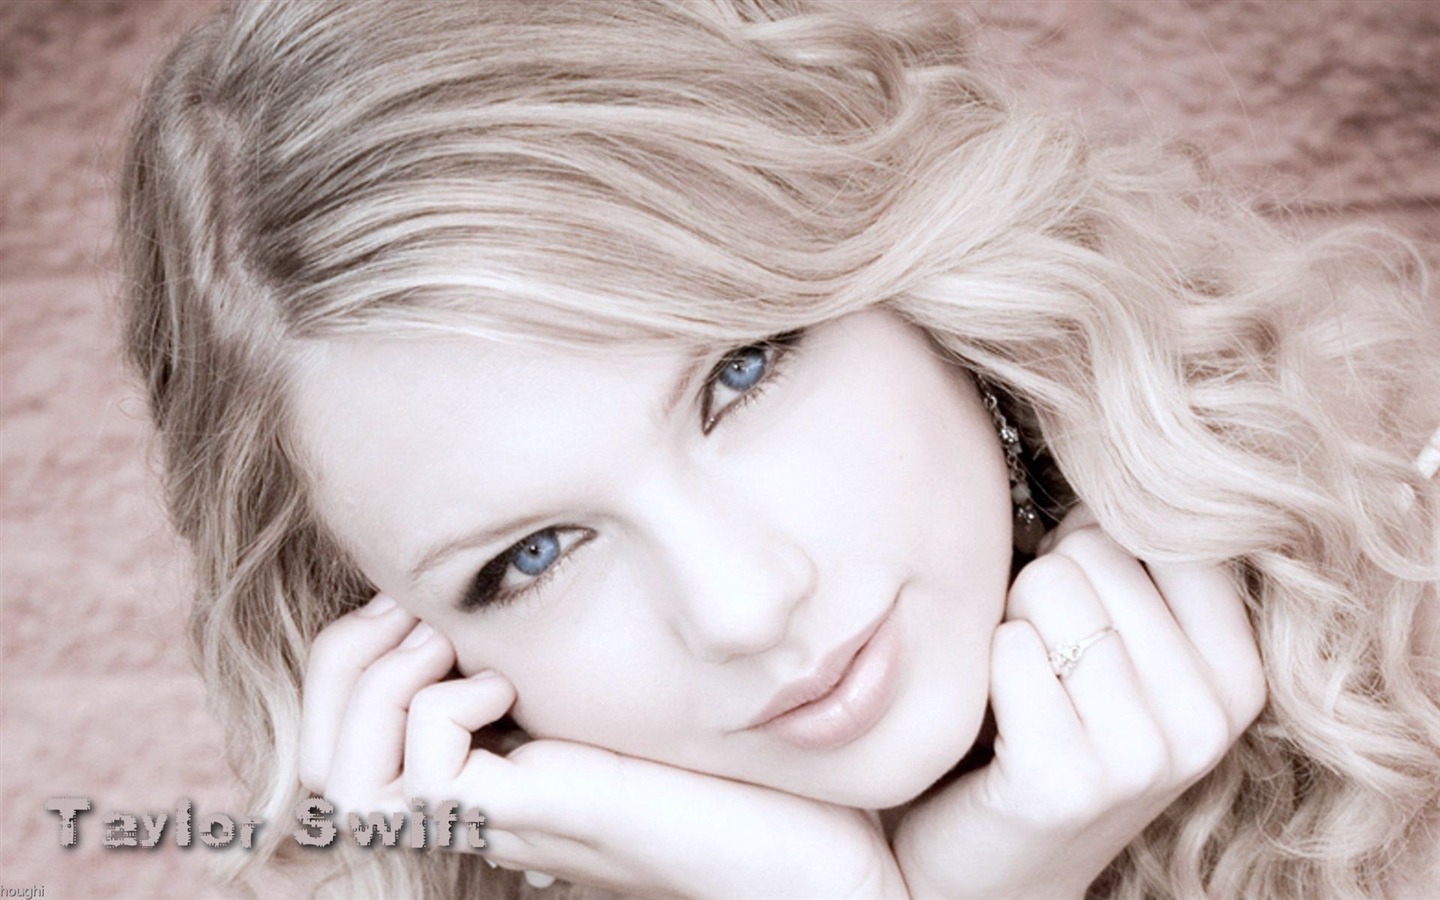 Taylor Swift #045 - 1440x900 Wallpapers Pictures Photos Images